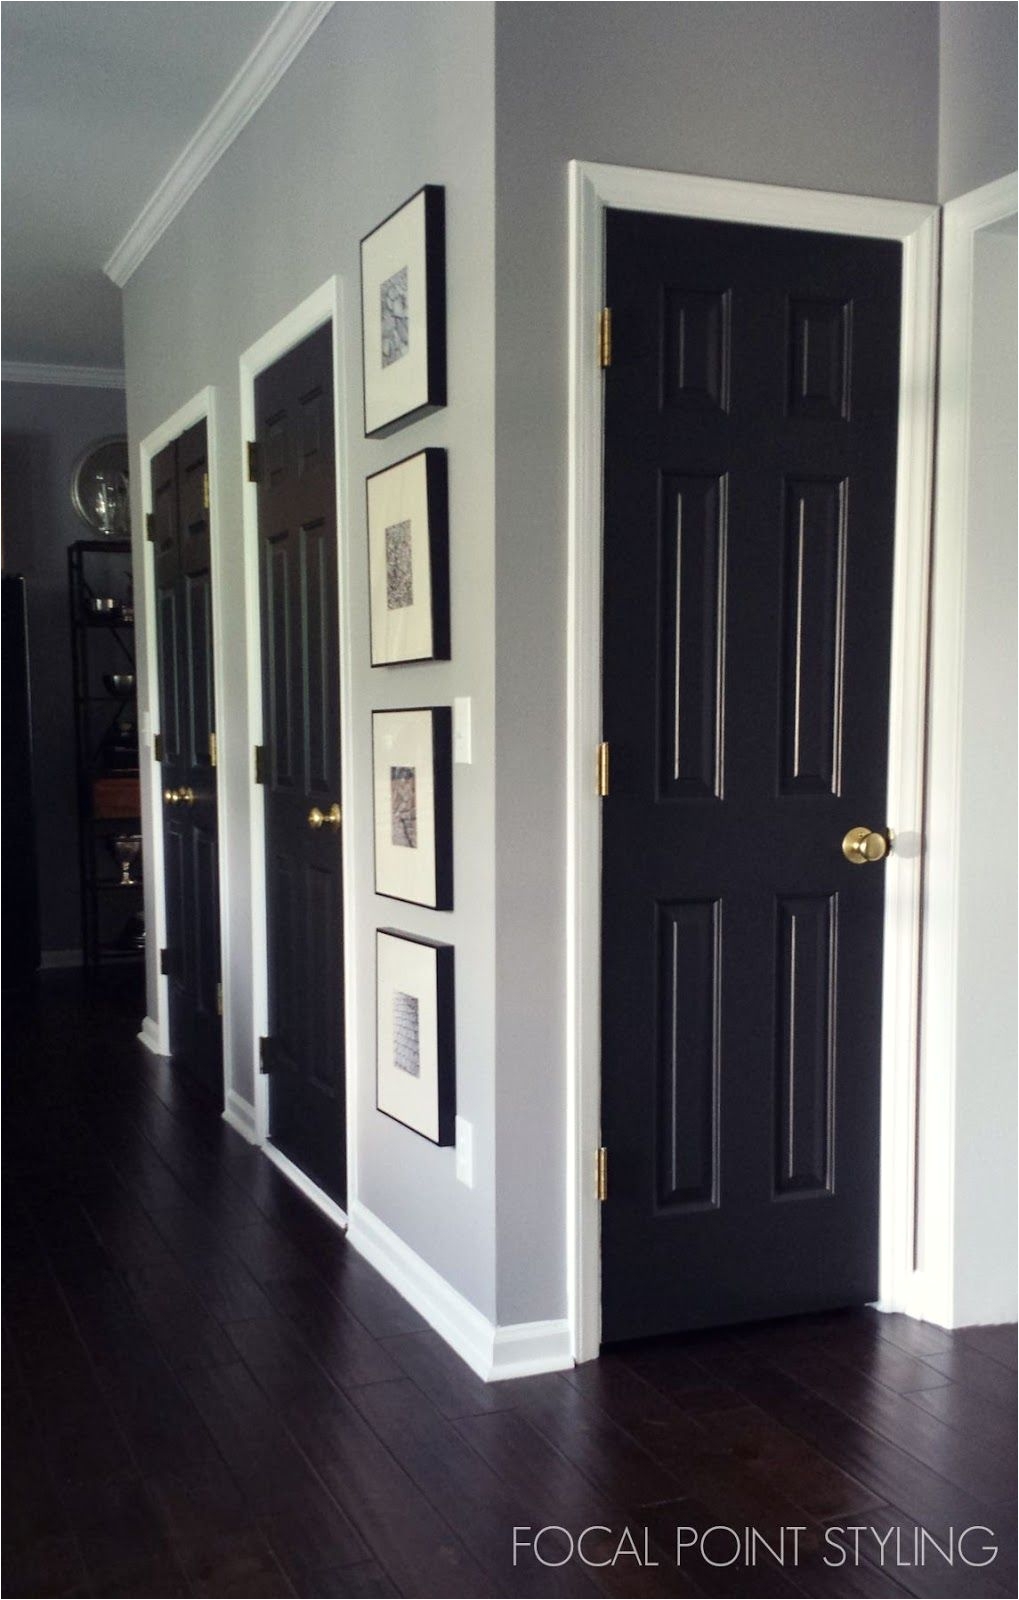 Best Black Paint Color for Interior Doors How to Paint Interior Doors Black Update Brass Hardware White